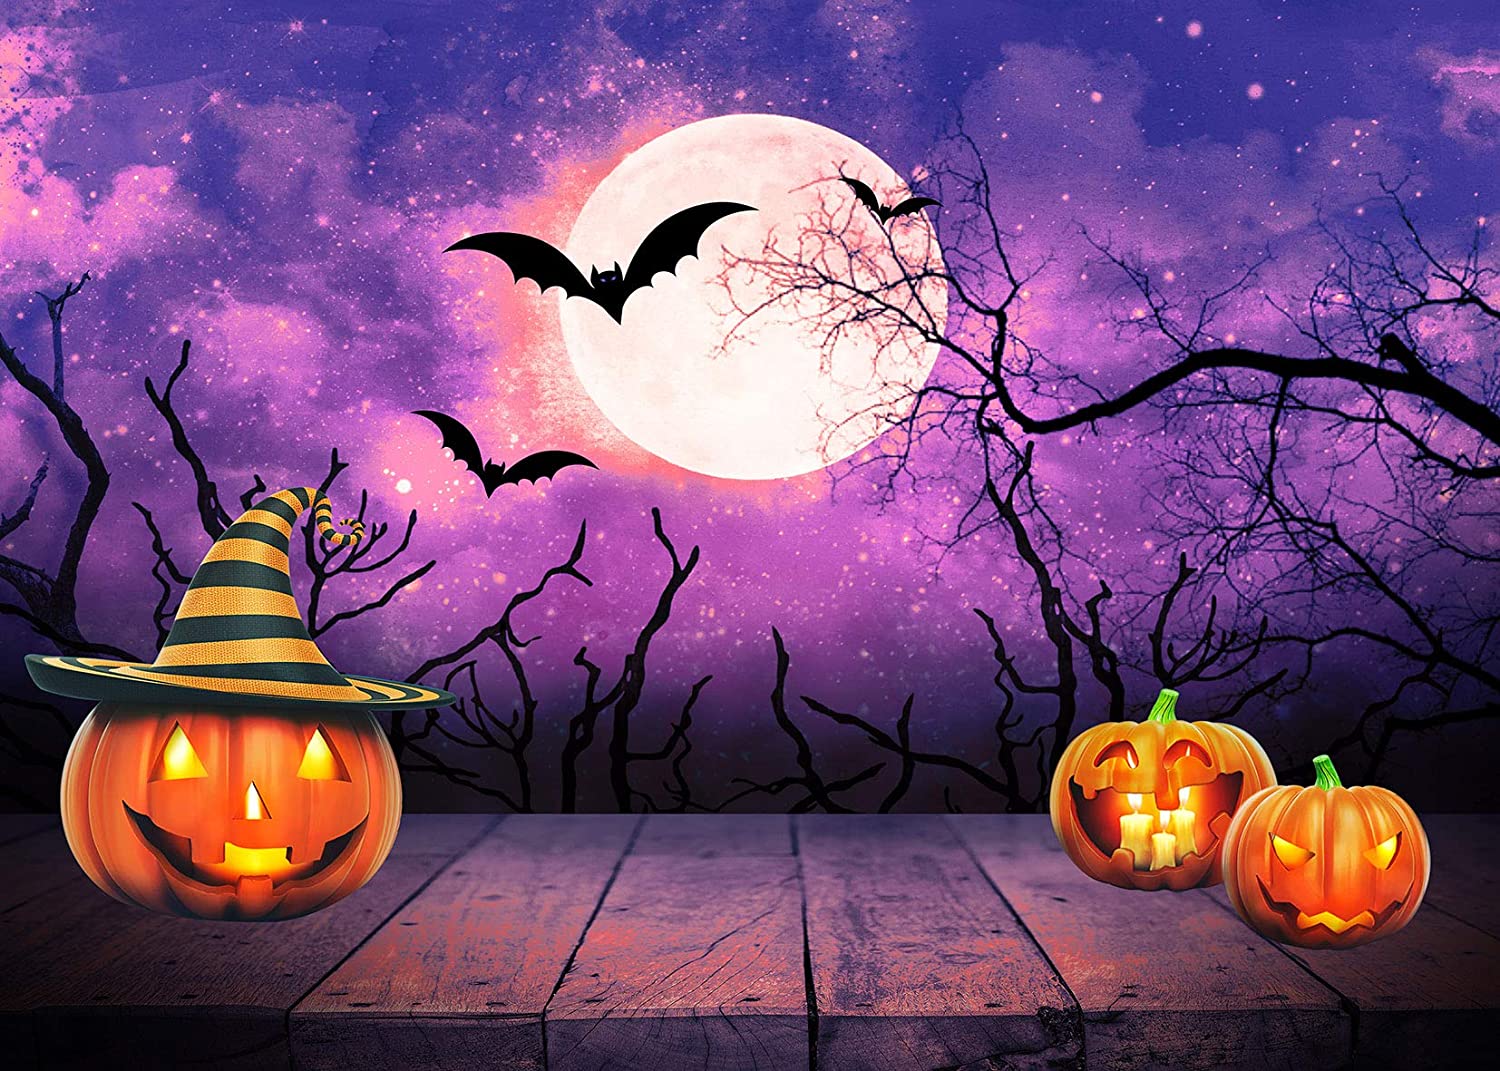 Amazon.com, LB Halloween Backdrops for Photography Pumpkin Lantern Party Banner Photo Background Purple Sky Moonlight Bat Halloween Party Decorations 7x5ft Customized Photo Booth Props